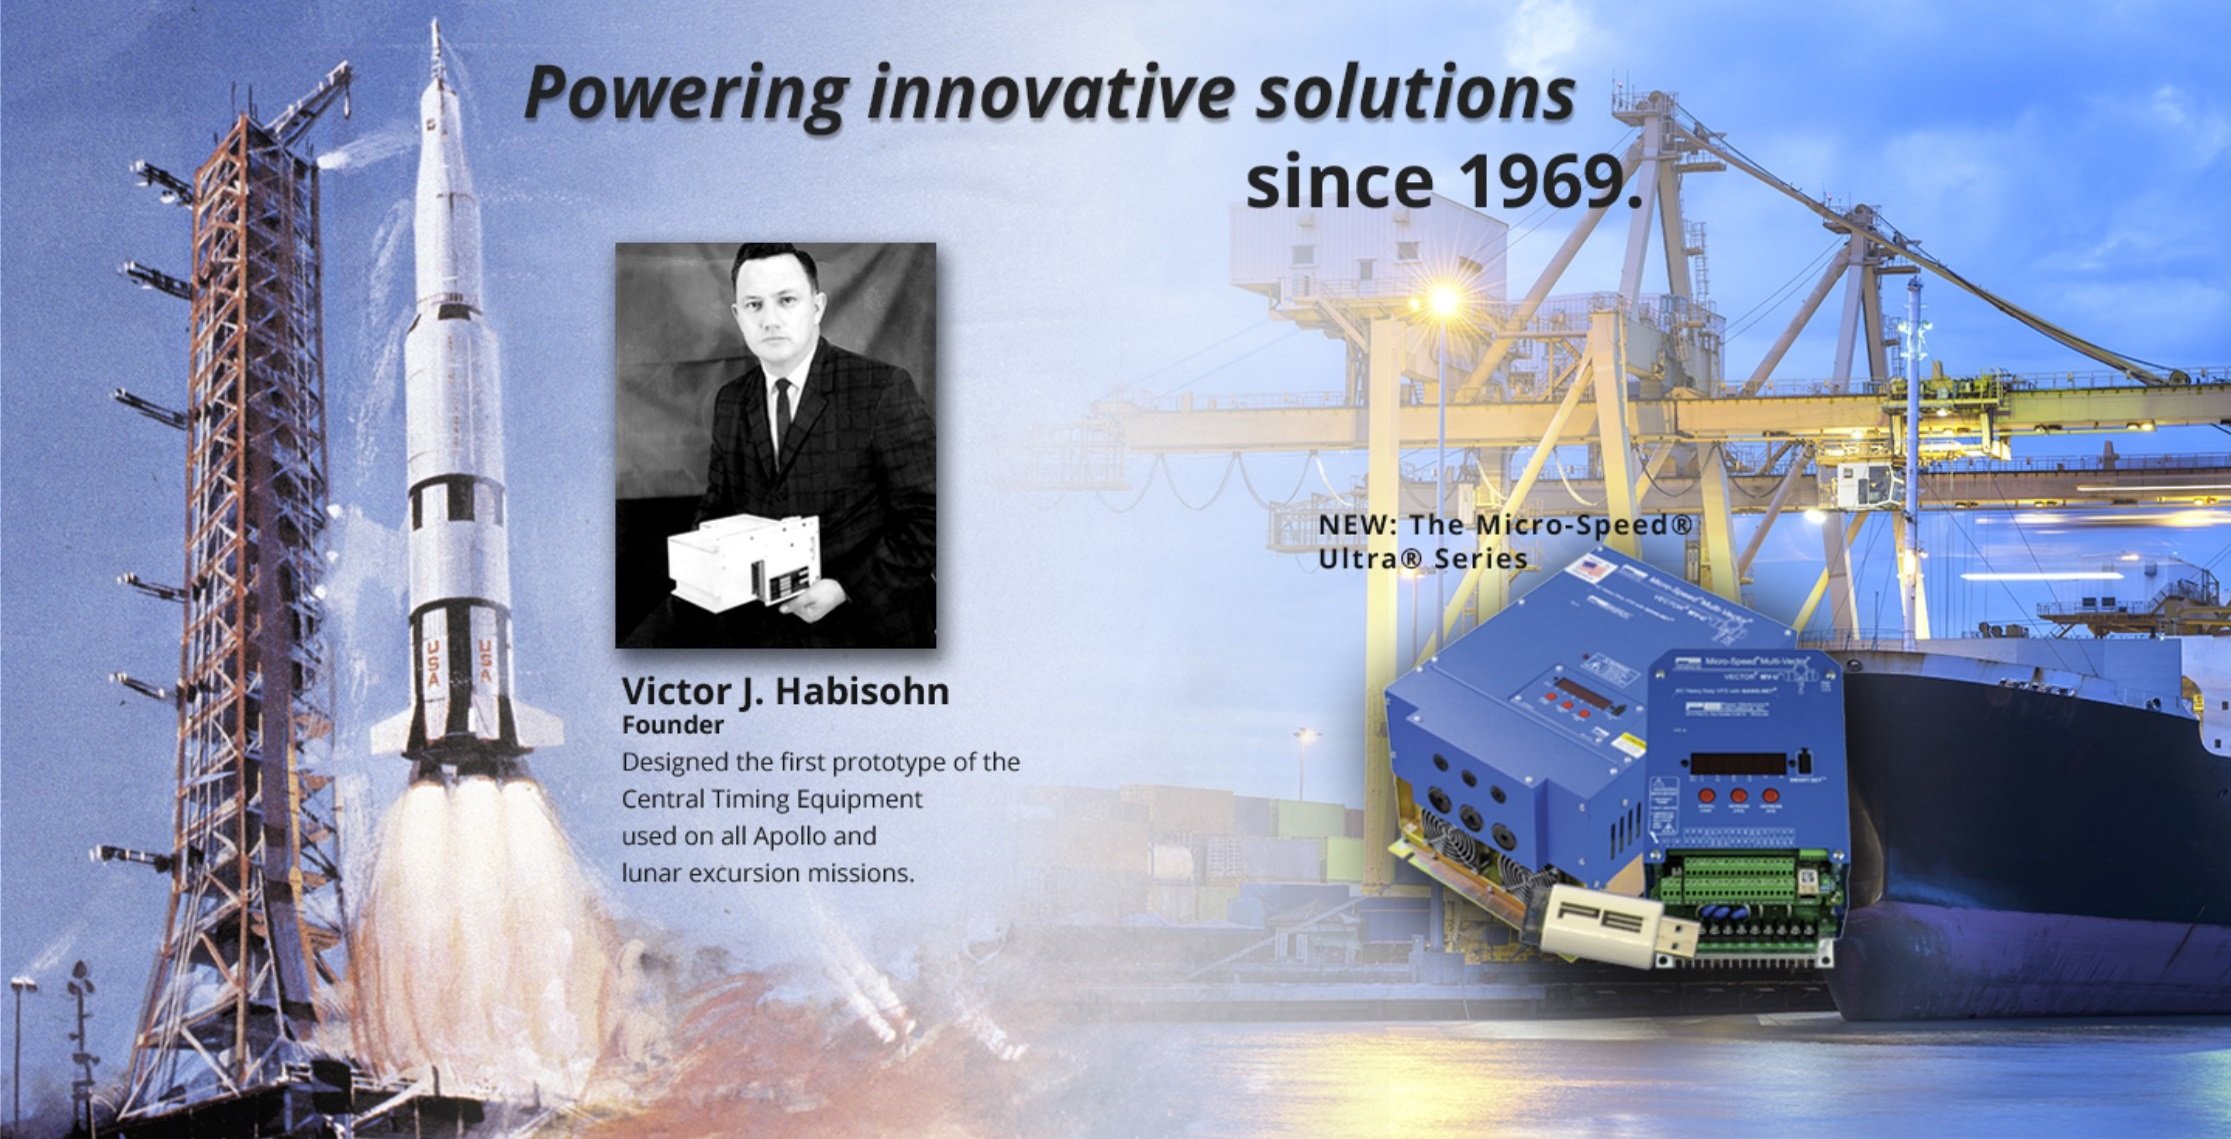 PE: Our history and our future. Powering innovative solutions since 1969.